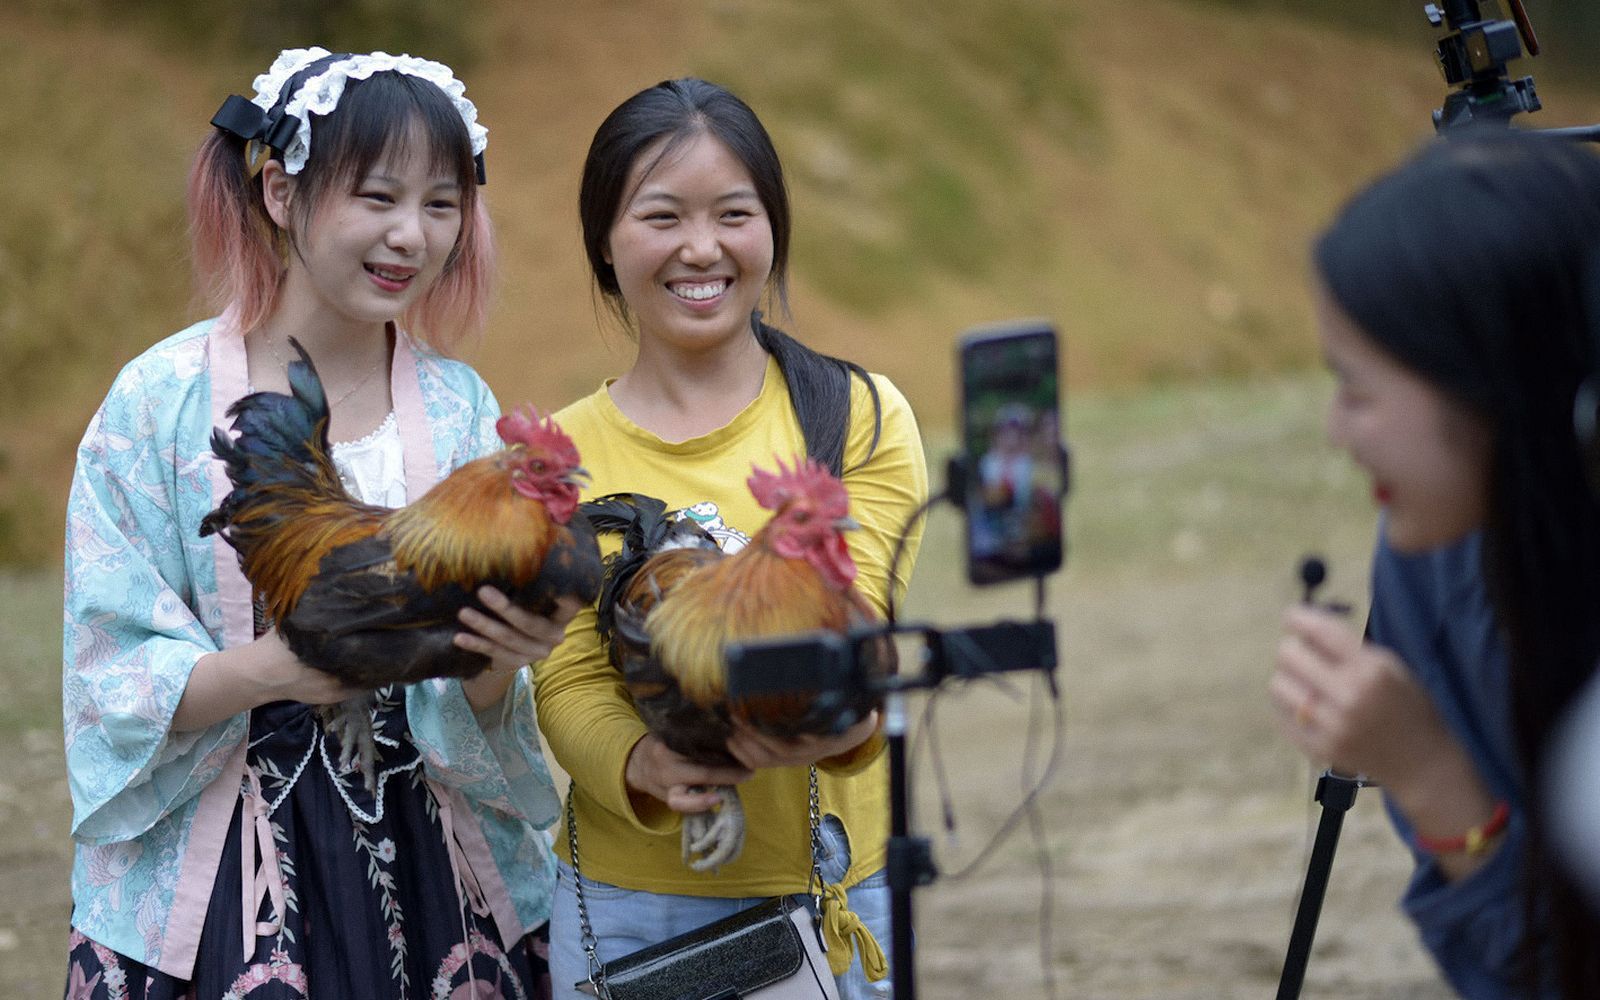 Who are the rural influencers?  In China some farmers have become millionaires seeing their products directly on TikTok